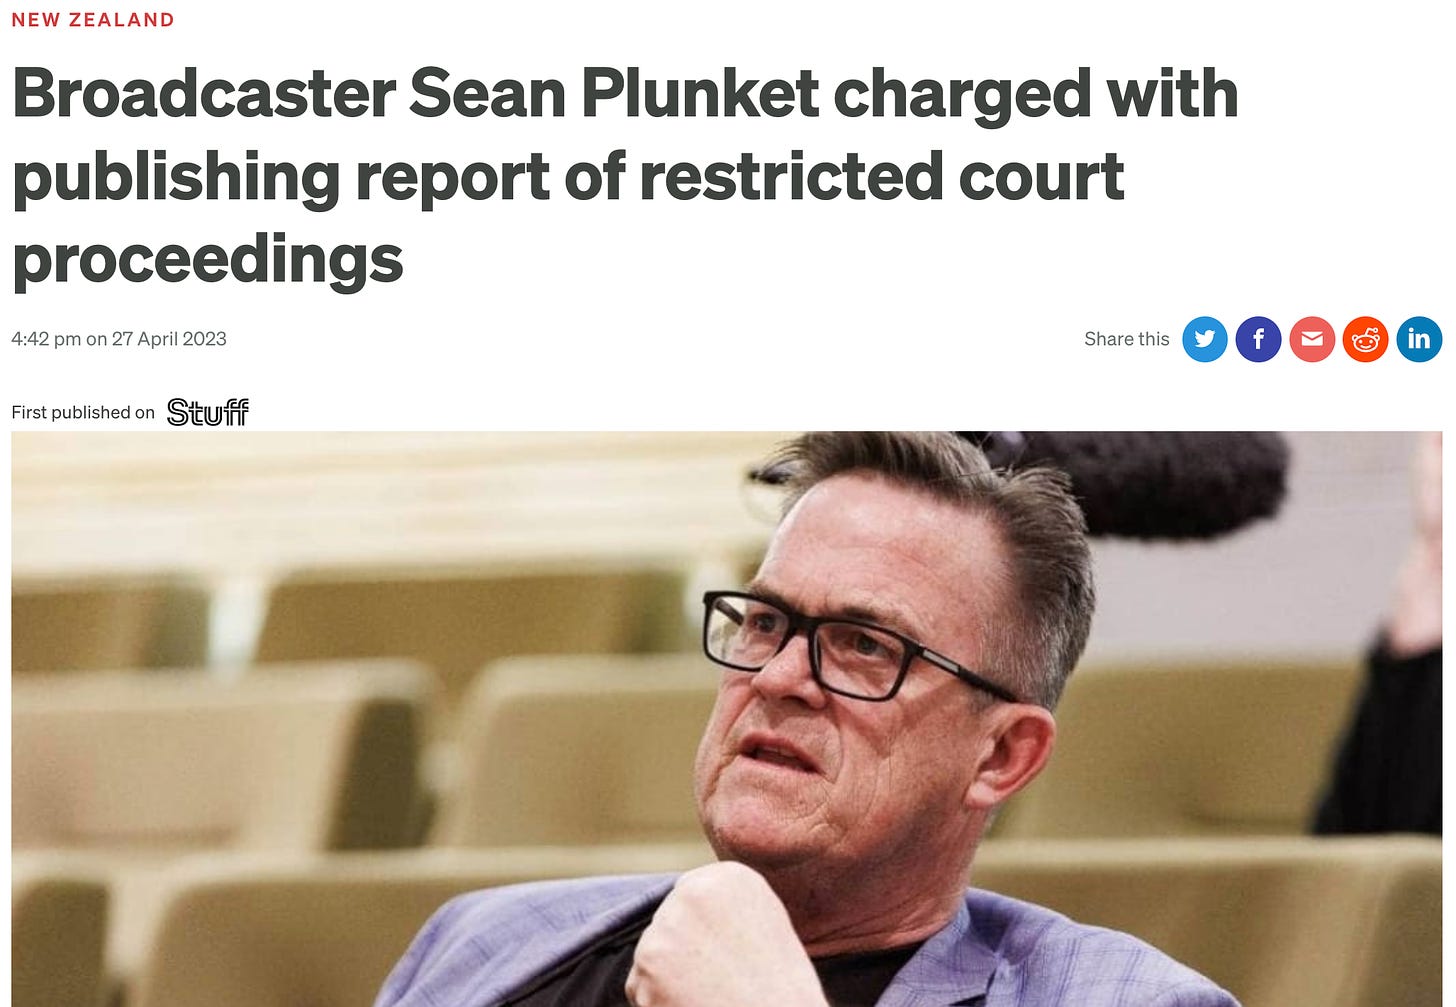 "Broadcaster Sean Plunket charged with publishing report of restricted court proceedings  Broadcaster Sean Plunket has been charged with publishing a report of court proceedings without leave. Plunket, who was briefly banned from Twitter earlier in the month, did not appear in Wellington District Court on Thursday for his first appearance."